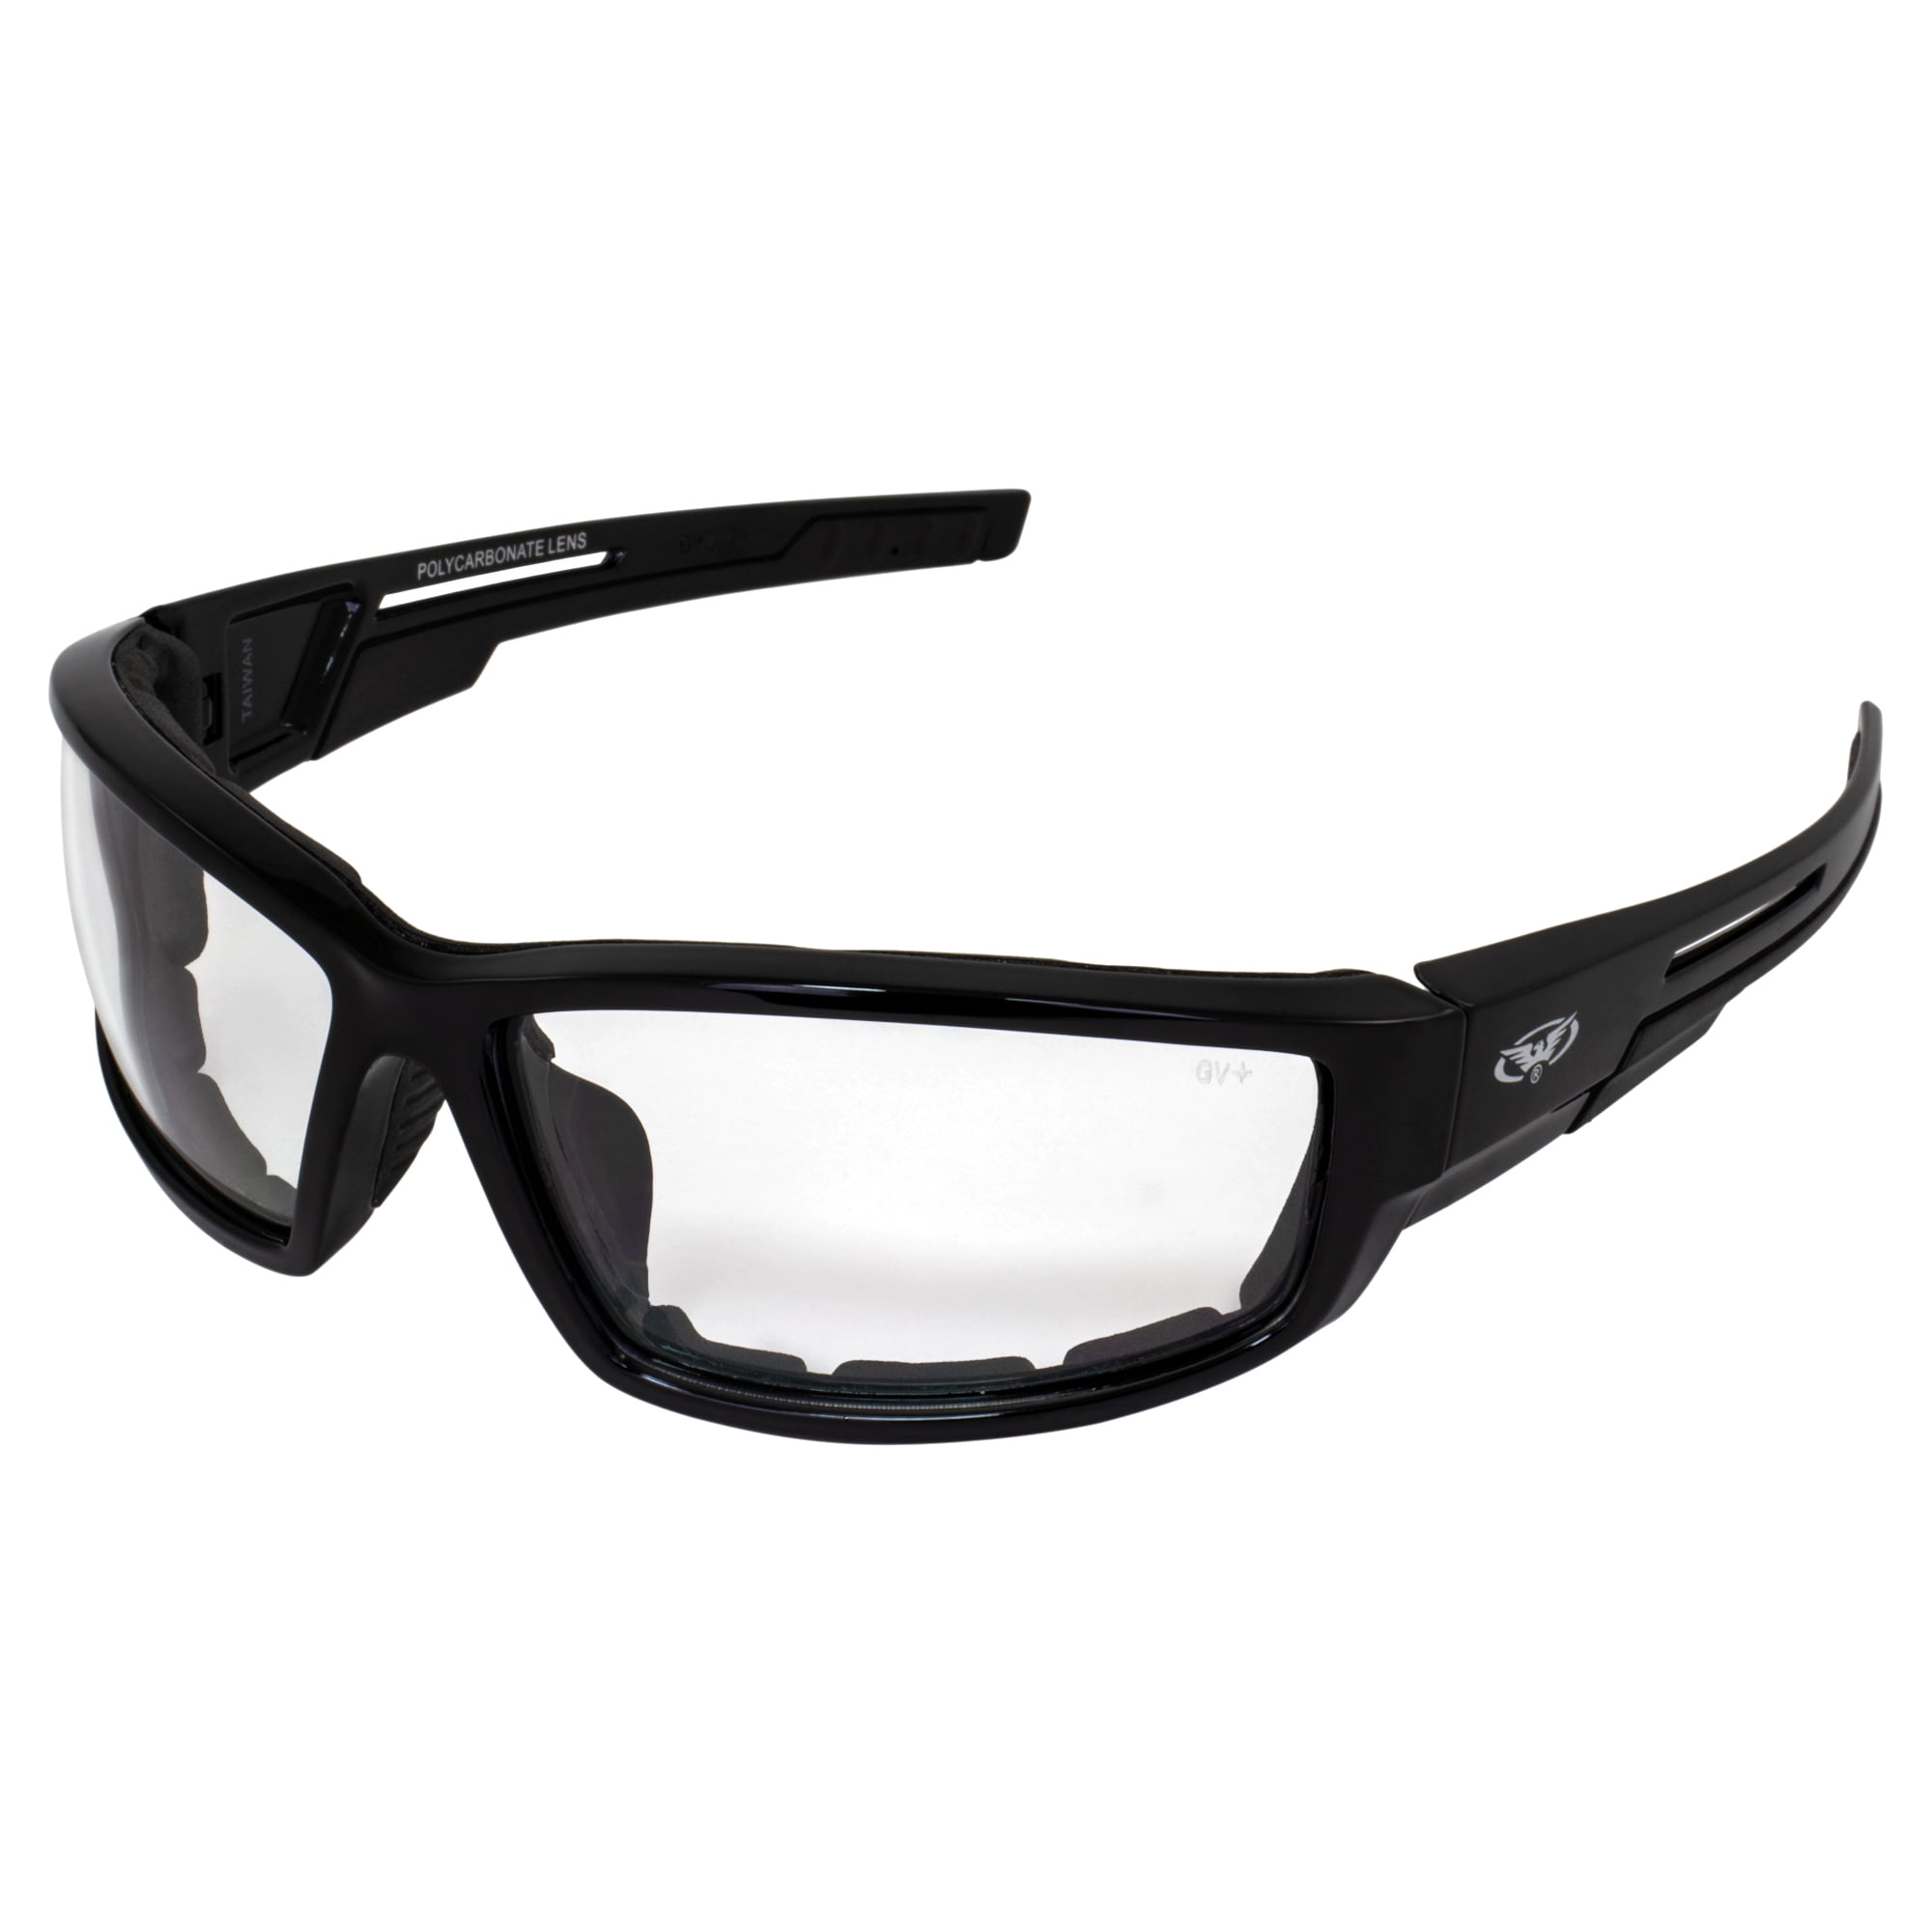 Sly Padded Motorcycle Riding Glasses Clear Shatterproof Lens by Global Vision 